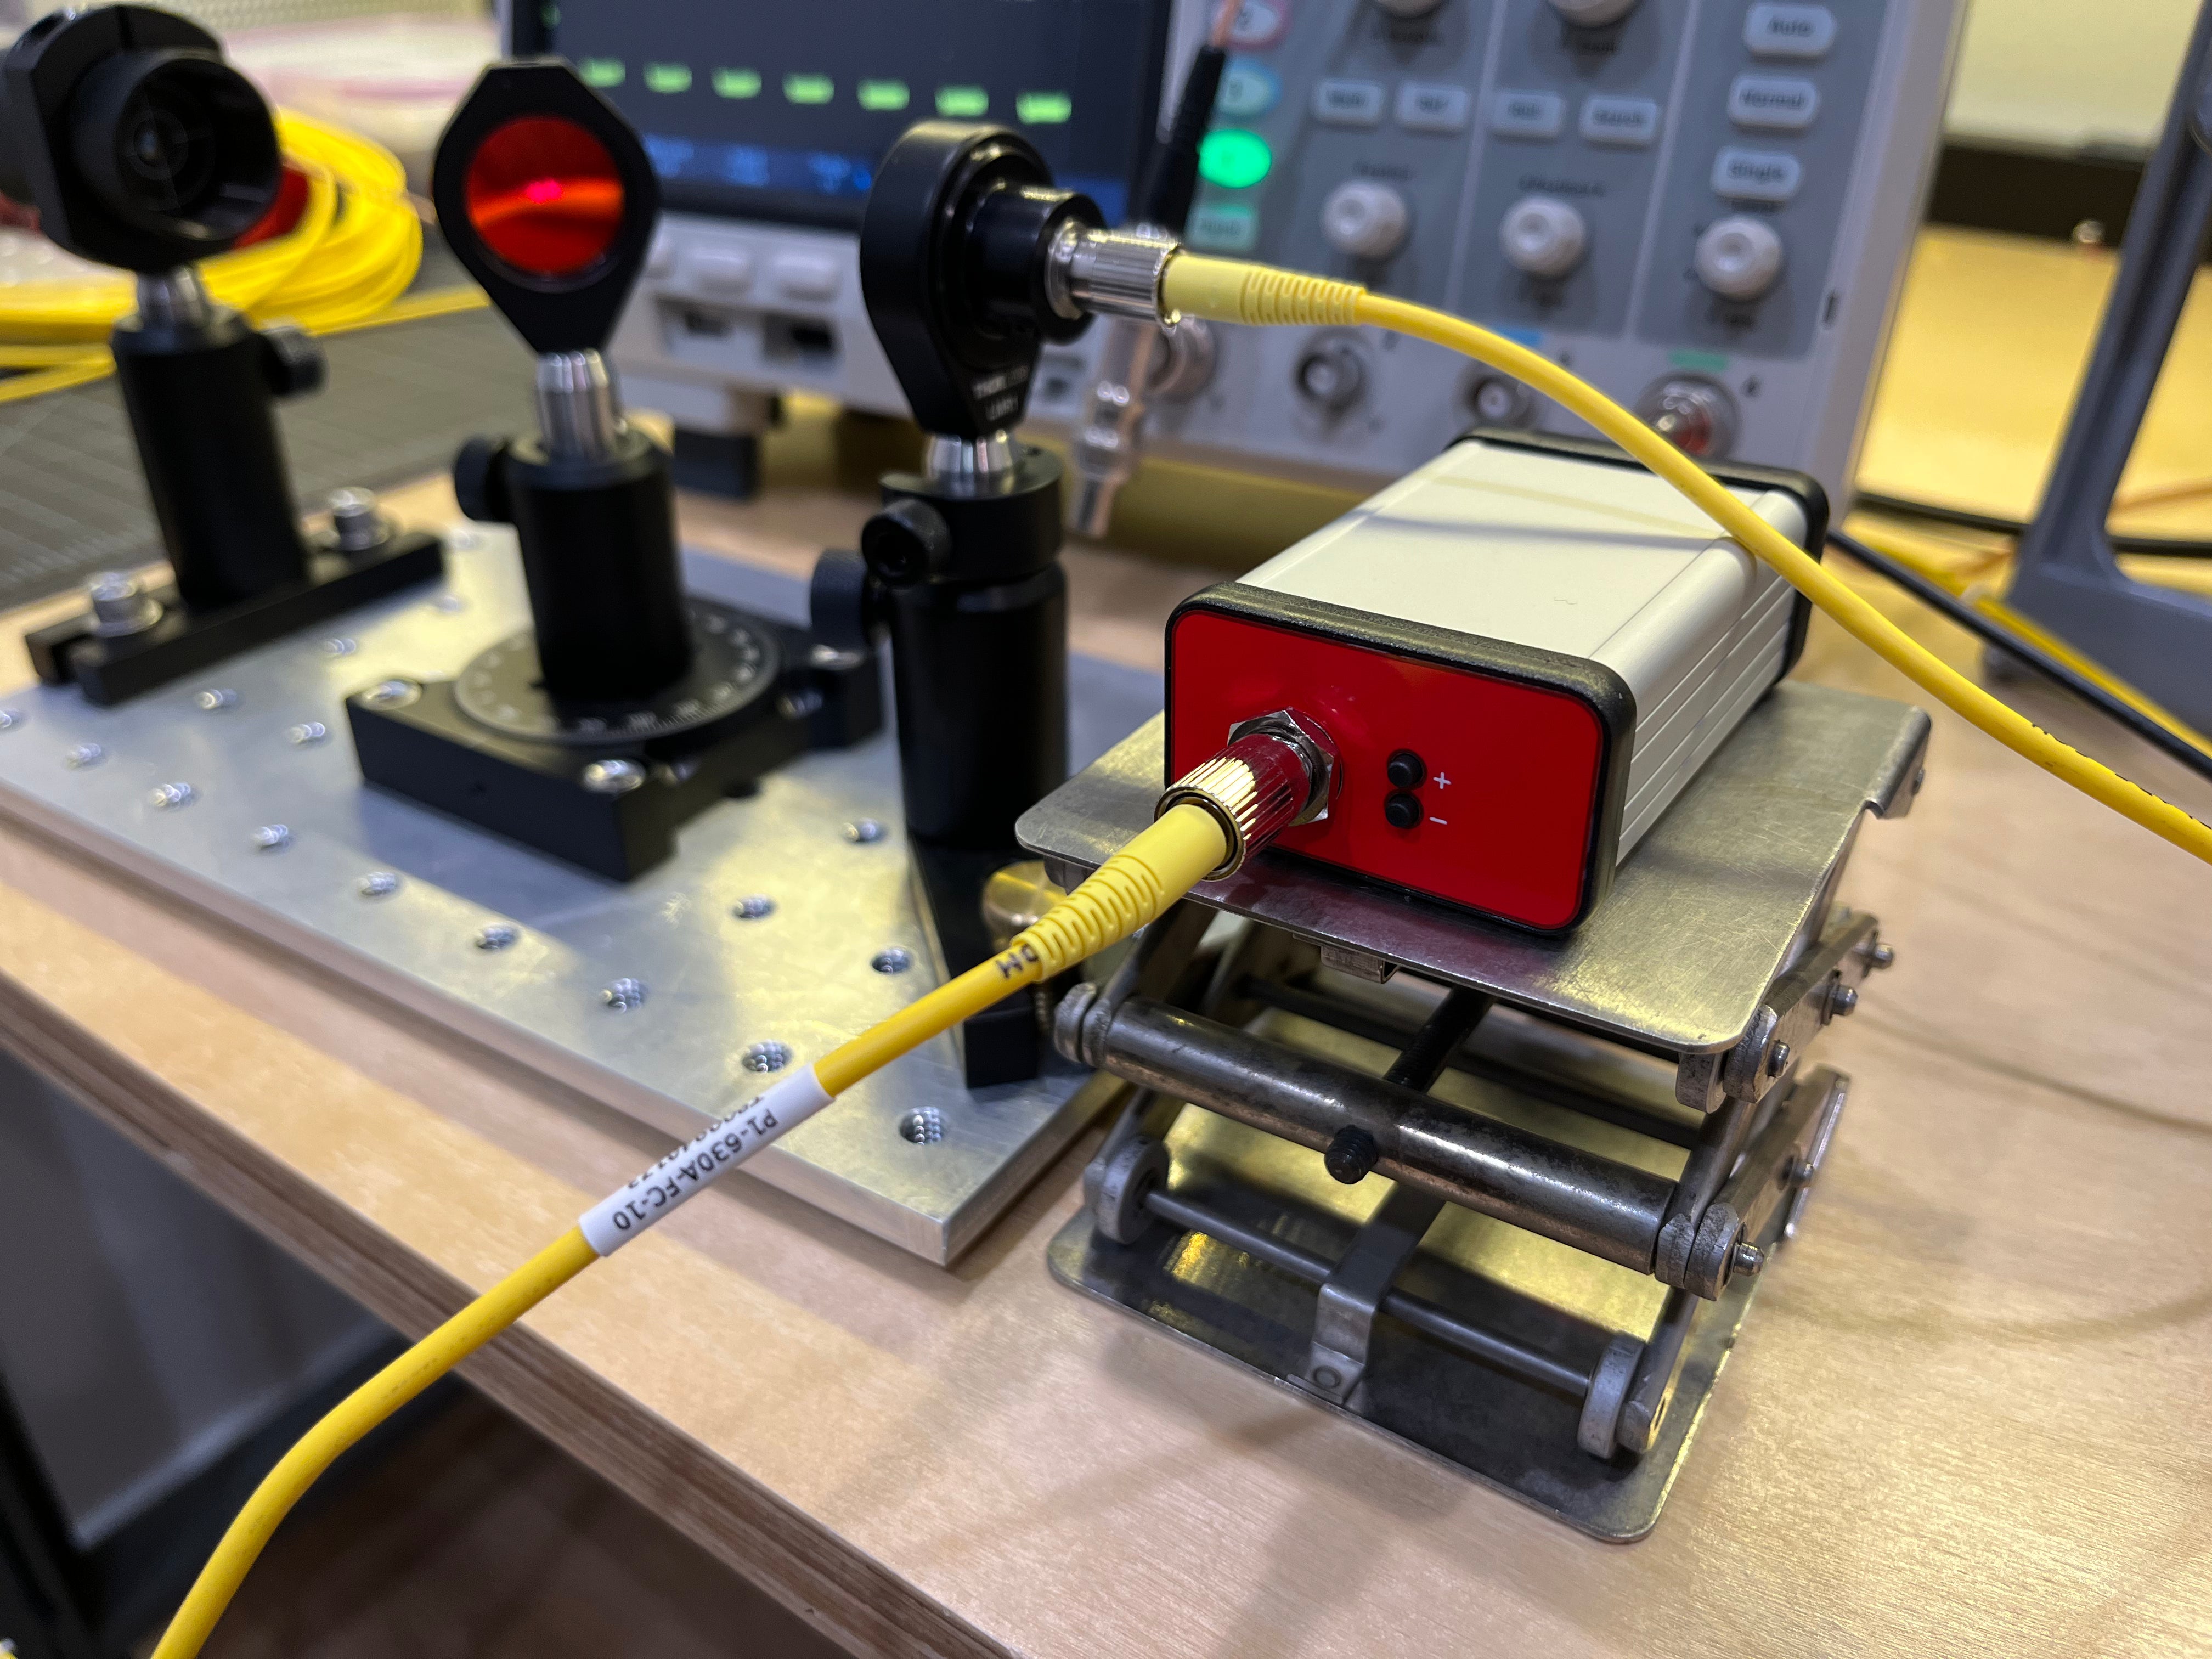 Measuring the out-of-band leakage for a 635-nm filter at 650-nm using the fiber-coupled laser diode (LDFC-01) and the LiPo-powered photodetector (TIA-R-01).